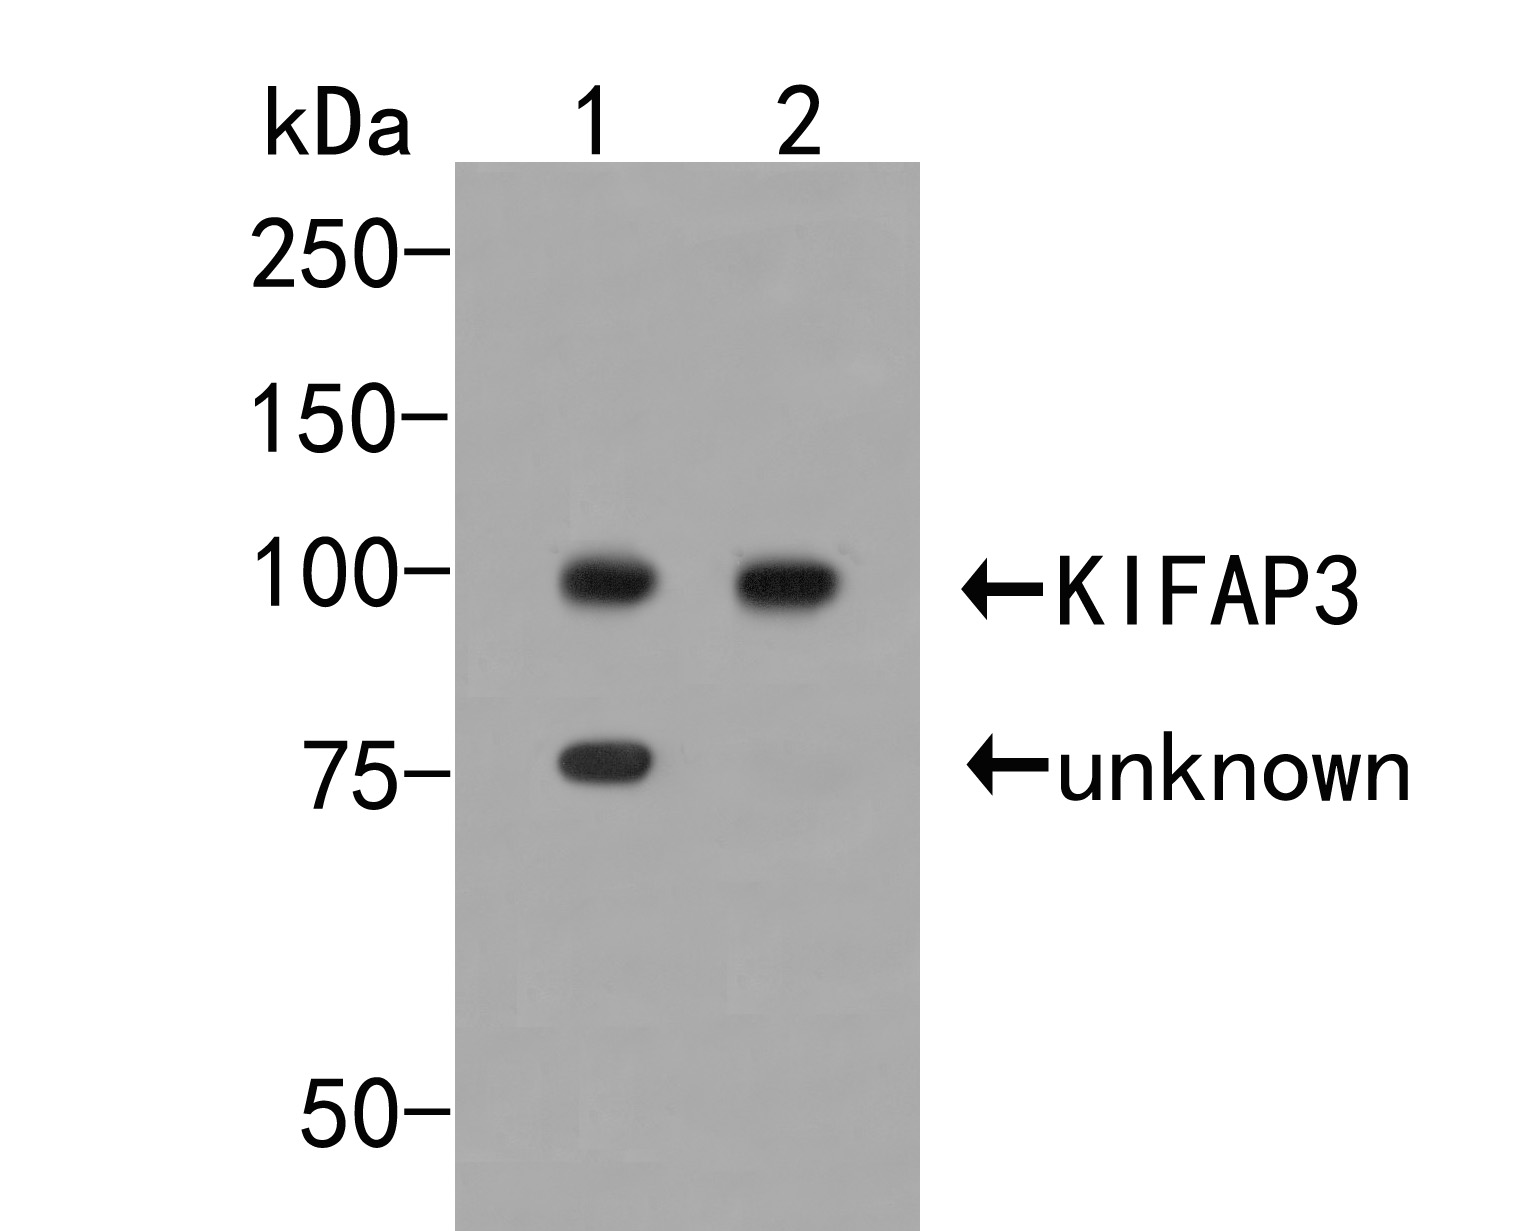 Western blot analysis of KIFAP3 on different lysates. Proteins were transferred to a PVDF membrane and blocked with 5% BSA in PBS for 1 hour at room temperature. The primary antibody (ER2001-69, 1/500) was used in 5% BSA at room temperature for 2 hours. Goat Anti-Rabbit IgG - HRP Secondary Antibody (HA1001) at 1:5,000 dilution was used for 1 hour at room temperature.<br />
Positive control: <br />
Lane 1: K562 cell lysate<br />
Lane 2: Rat testis tissue lysate